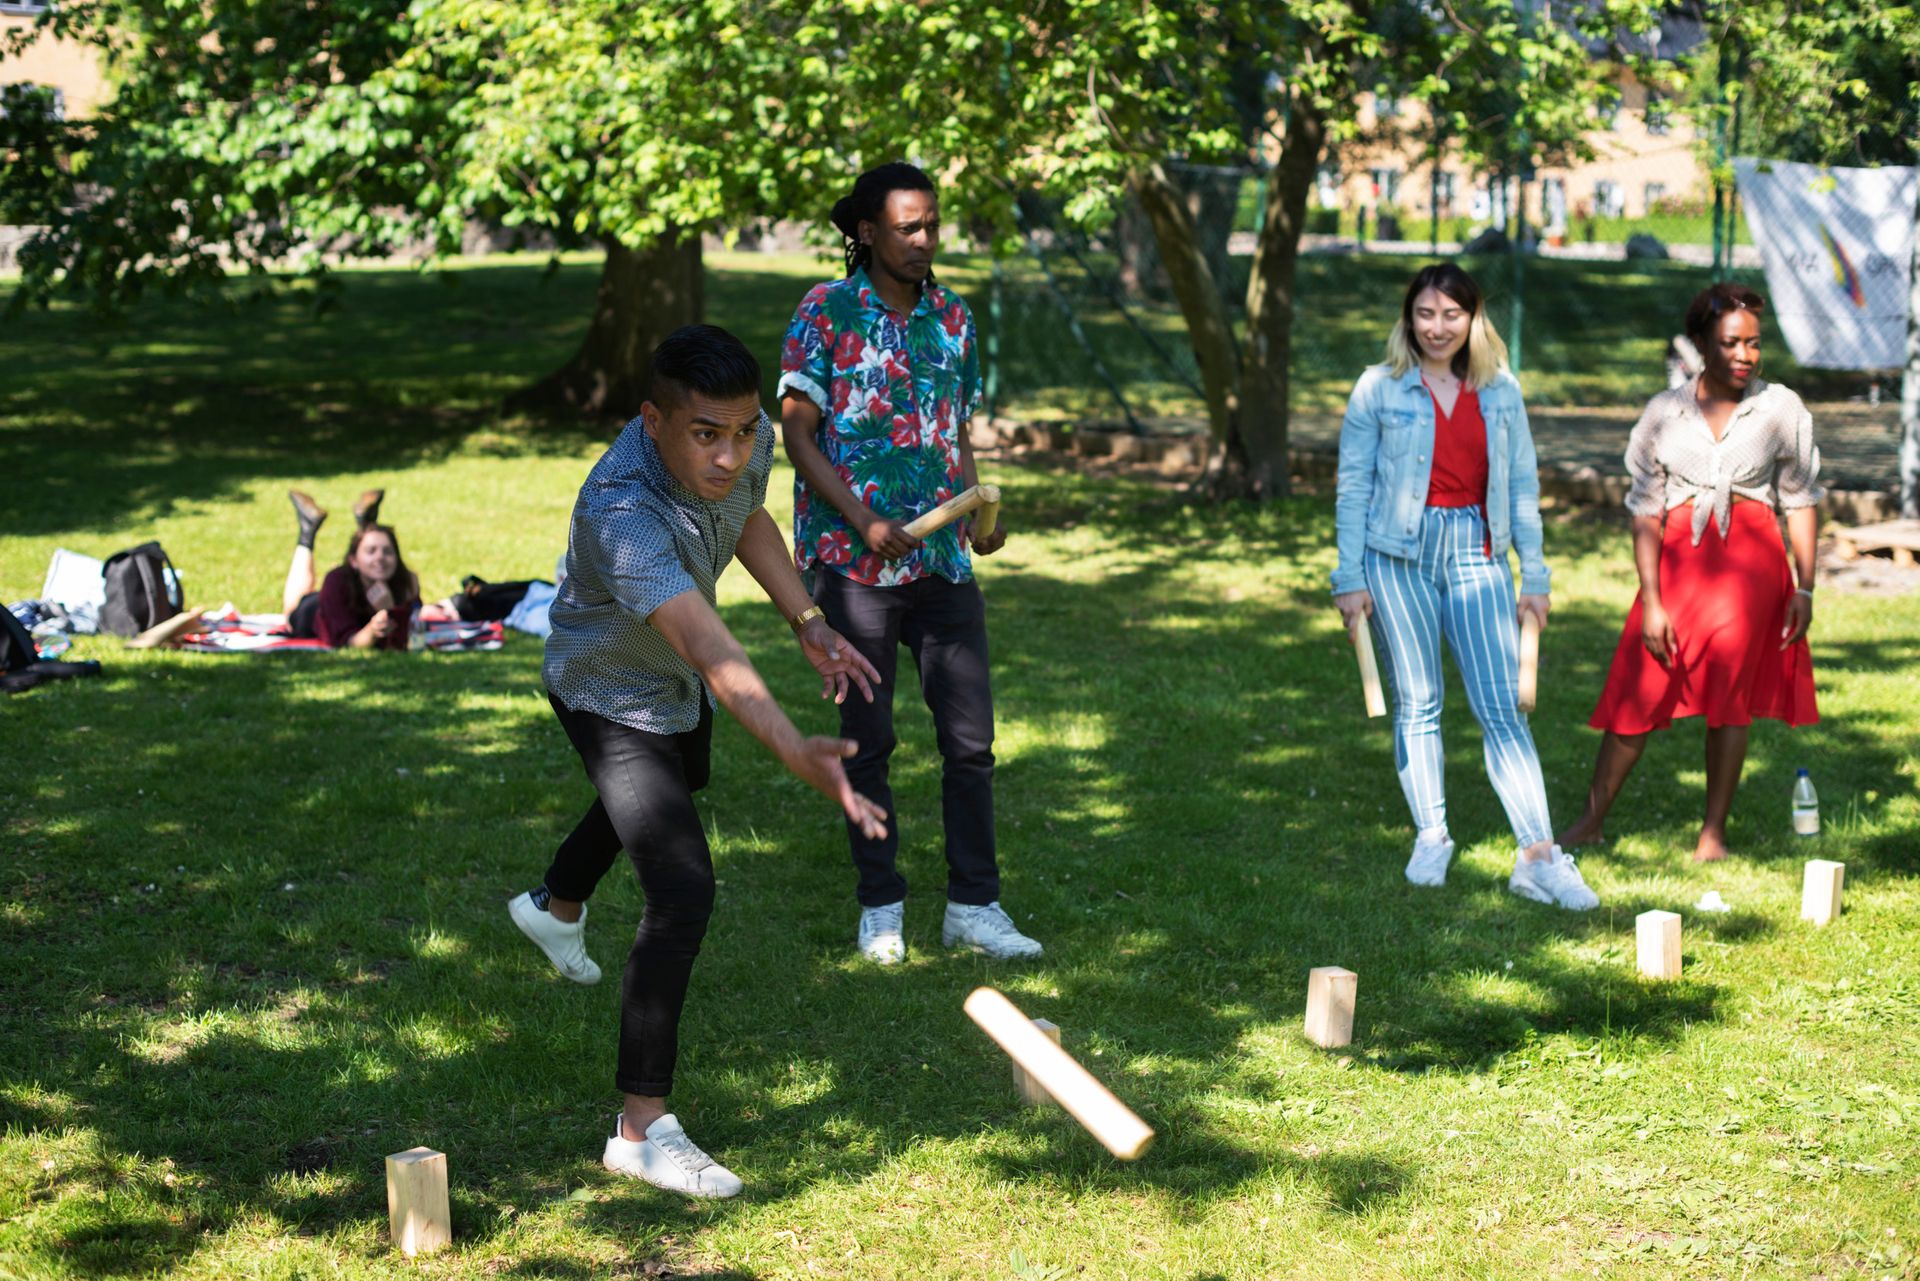 A group of international students playing the Swedish lawn game 'Kubb' in a partk.